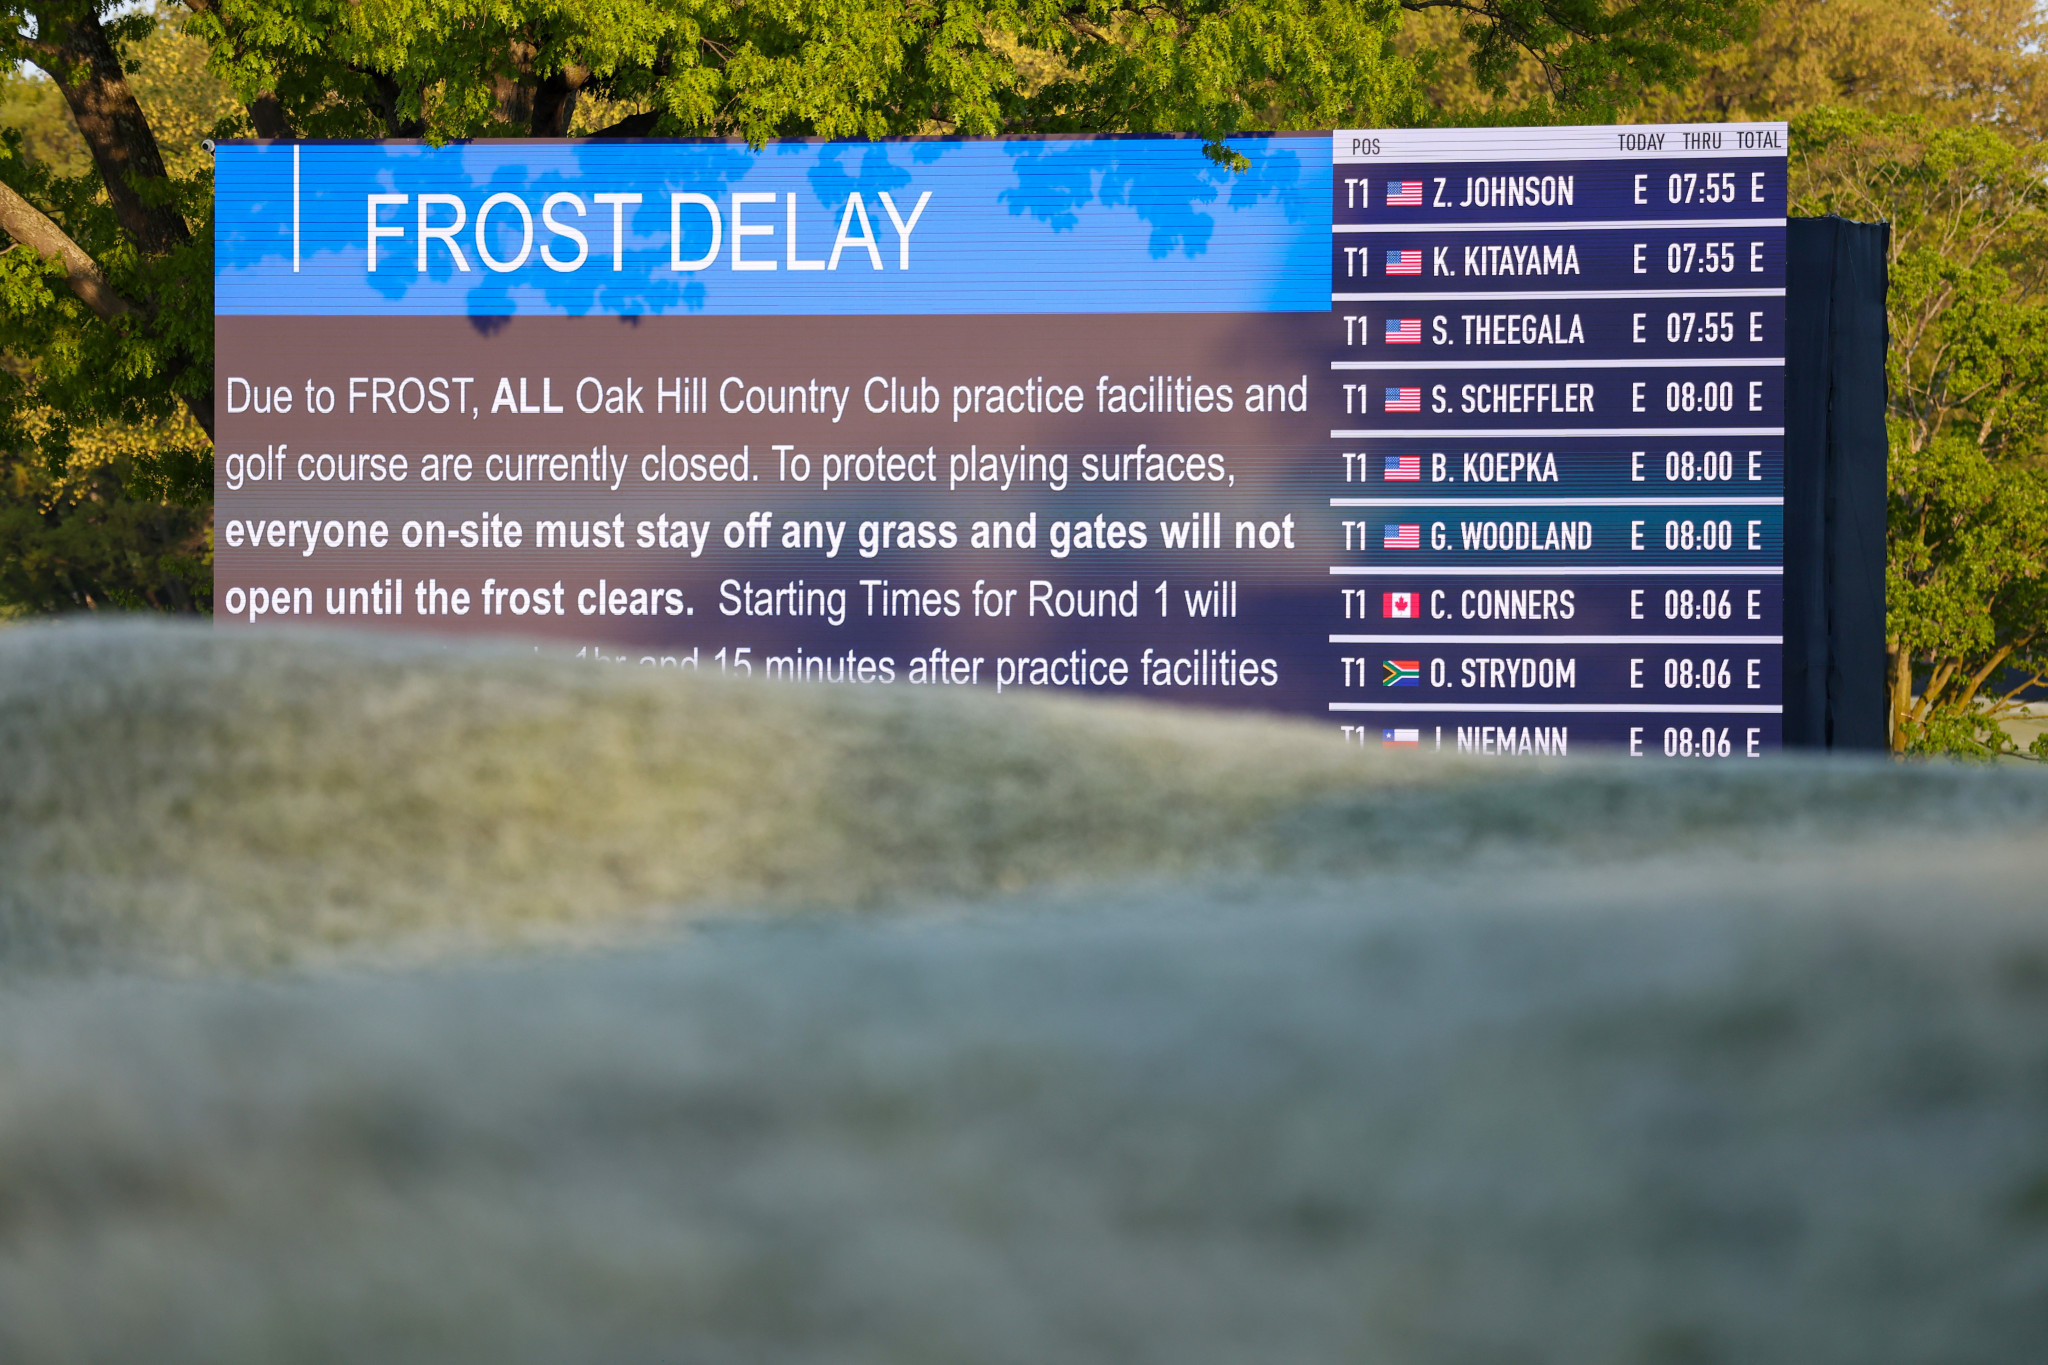 Play was delayed by frost at Oak Hill Country Club, with overnight leader Eric Cole of the US only completing 14 holes on the first day ©Getty Images